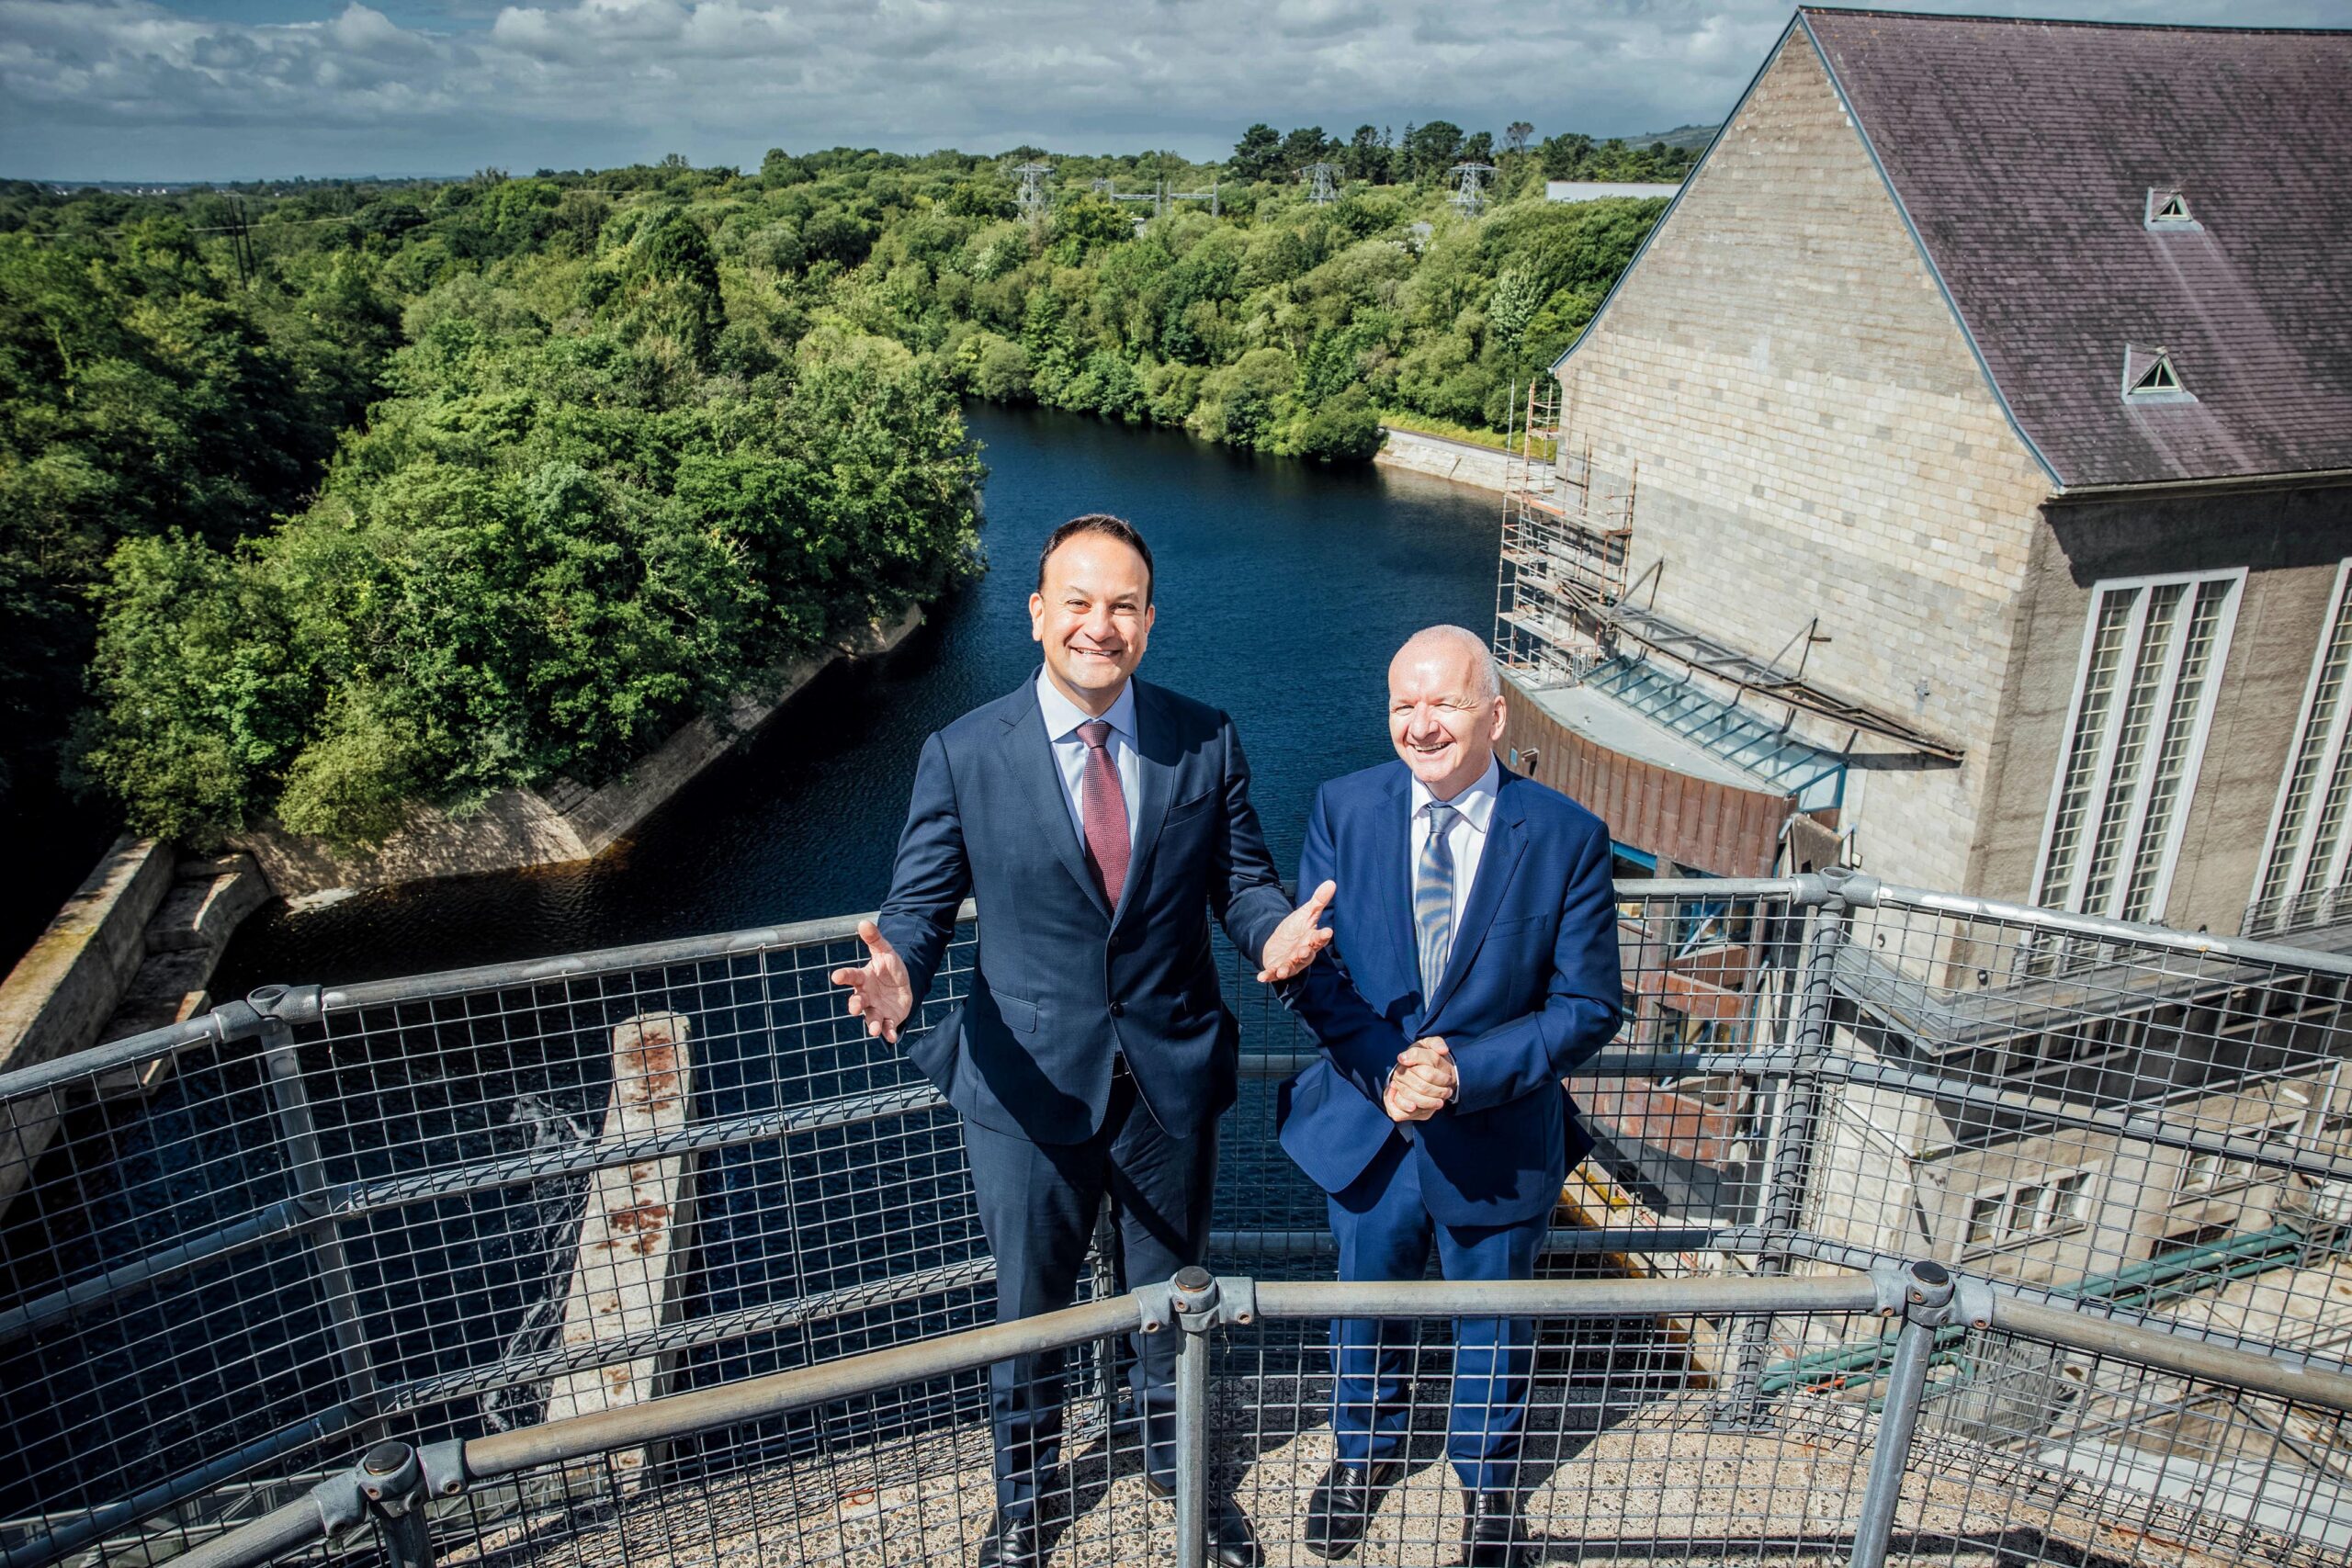 Shannon Estuary Economic Taskforce Report welcomed by LCCC